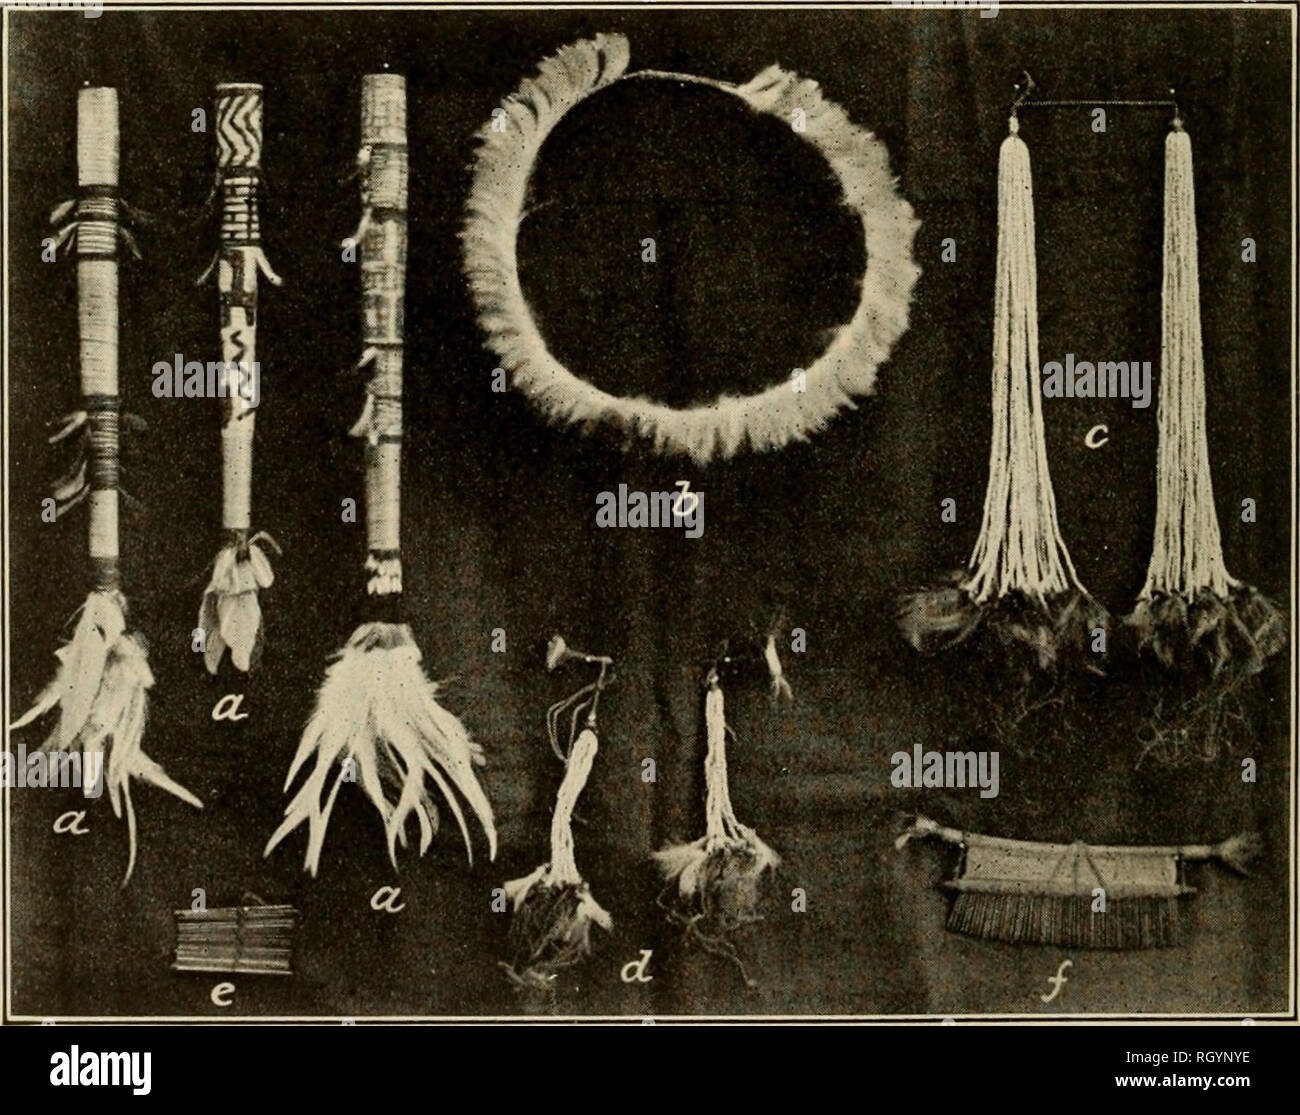 . Bulletin. Ethnology. A, Various Waiwai ornaments and implements, a, Bush-hog scraper. (Sec. 18.) 6, Male cheek ornament. (Sec. 504.) c, Nose ornament. (Sec. 505.) d, Stage in the making of a comb. (Sec. 517 A.) e. The compound brush cured for curare painting. (Sec. 122). B, Various Waiwai ornaments, etc. a. Three simple forms of hair tubes. (Sec. 515.) 6, A feather fillet. (Sec. 530.) c, A necklet. (Sec'. 531.) d, Two ear ornaments. (Sec. 506.) e,/, Hair comb in progress of construction. (Sec. 517 A). Please note that these images are extracted from scanned page images that may have been dig Stock Photo